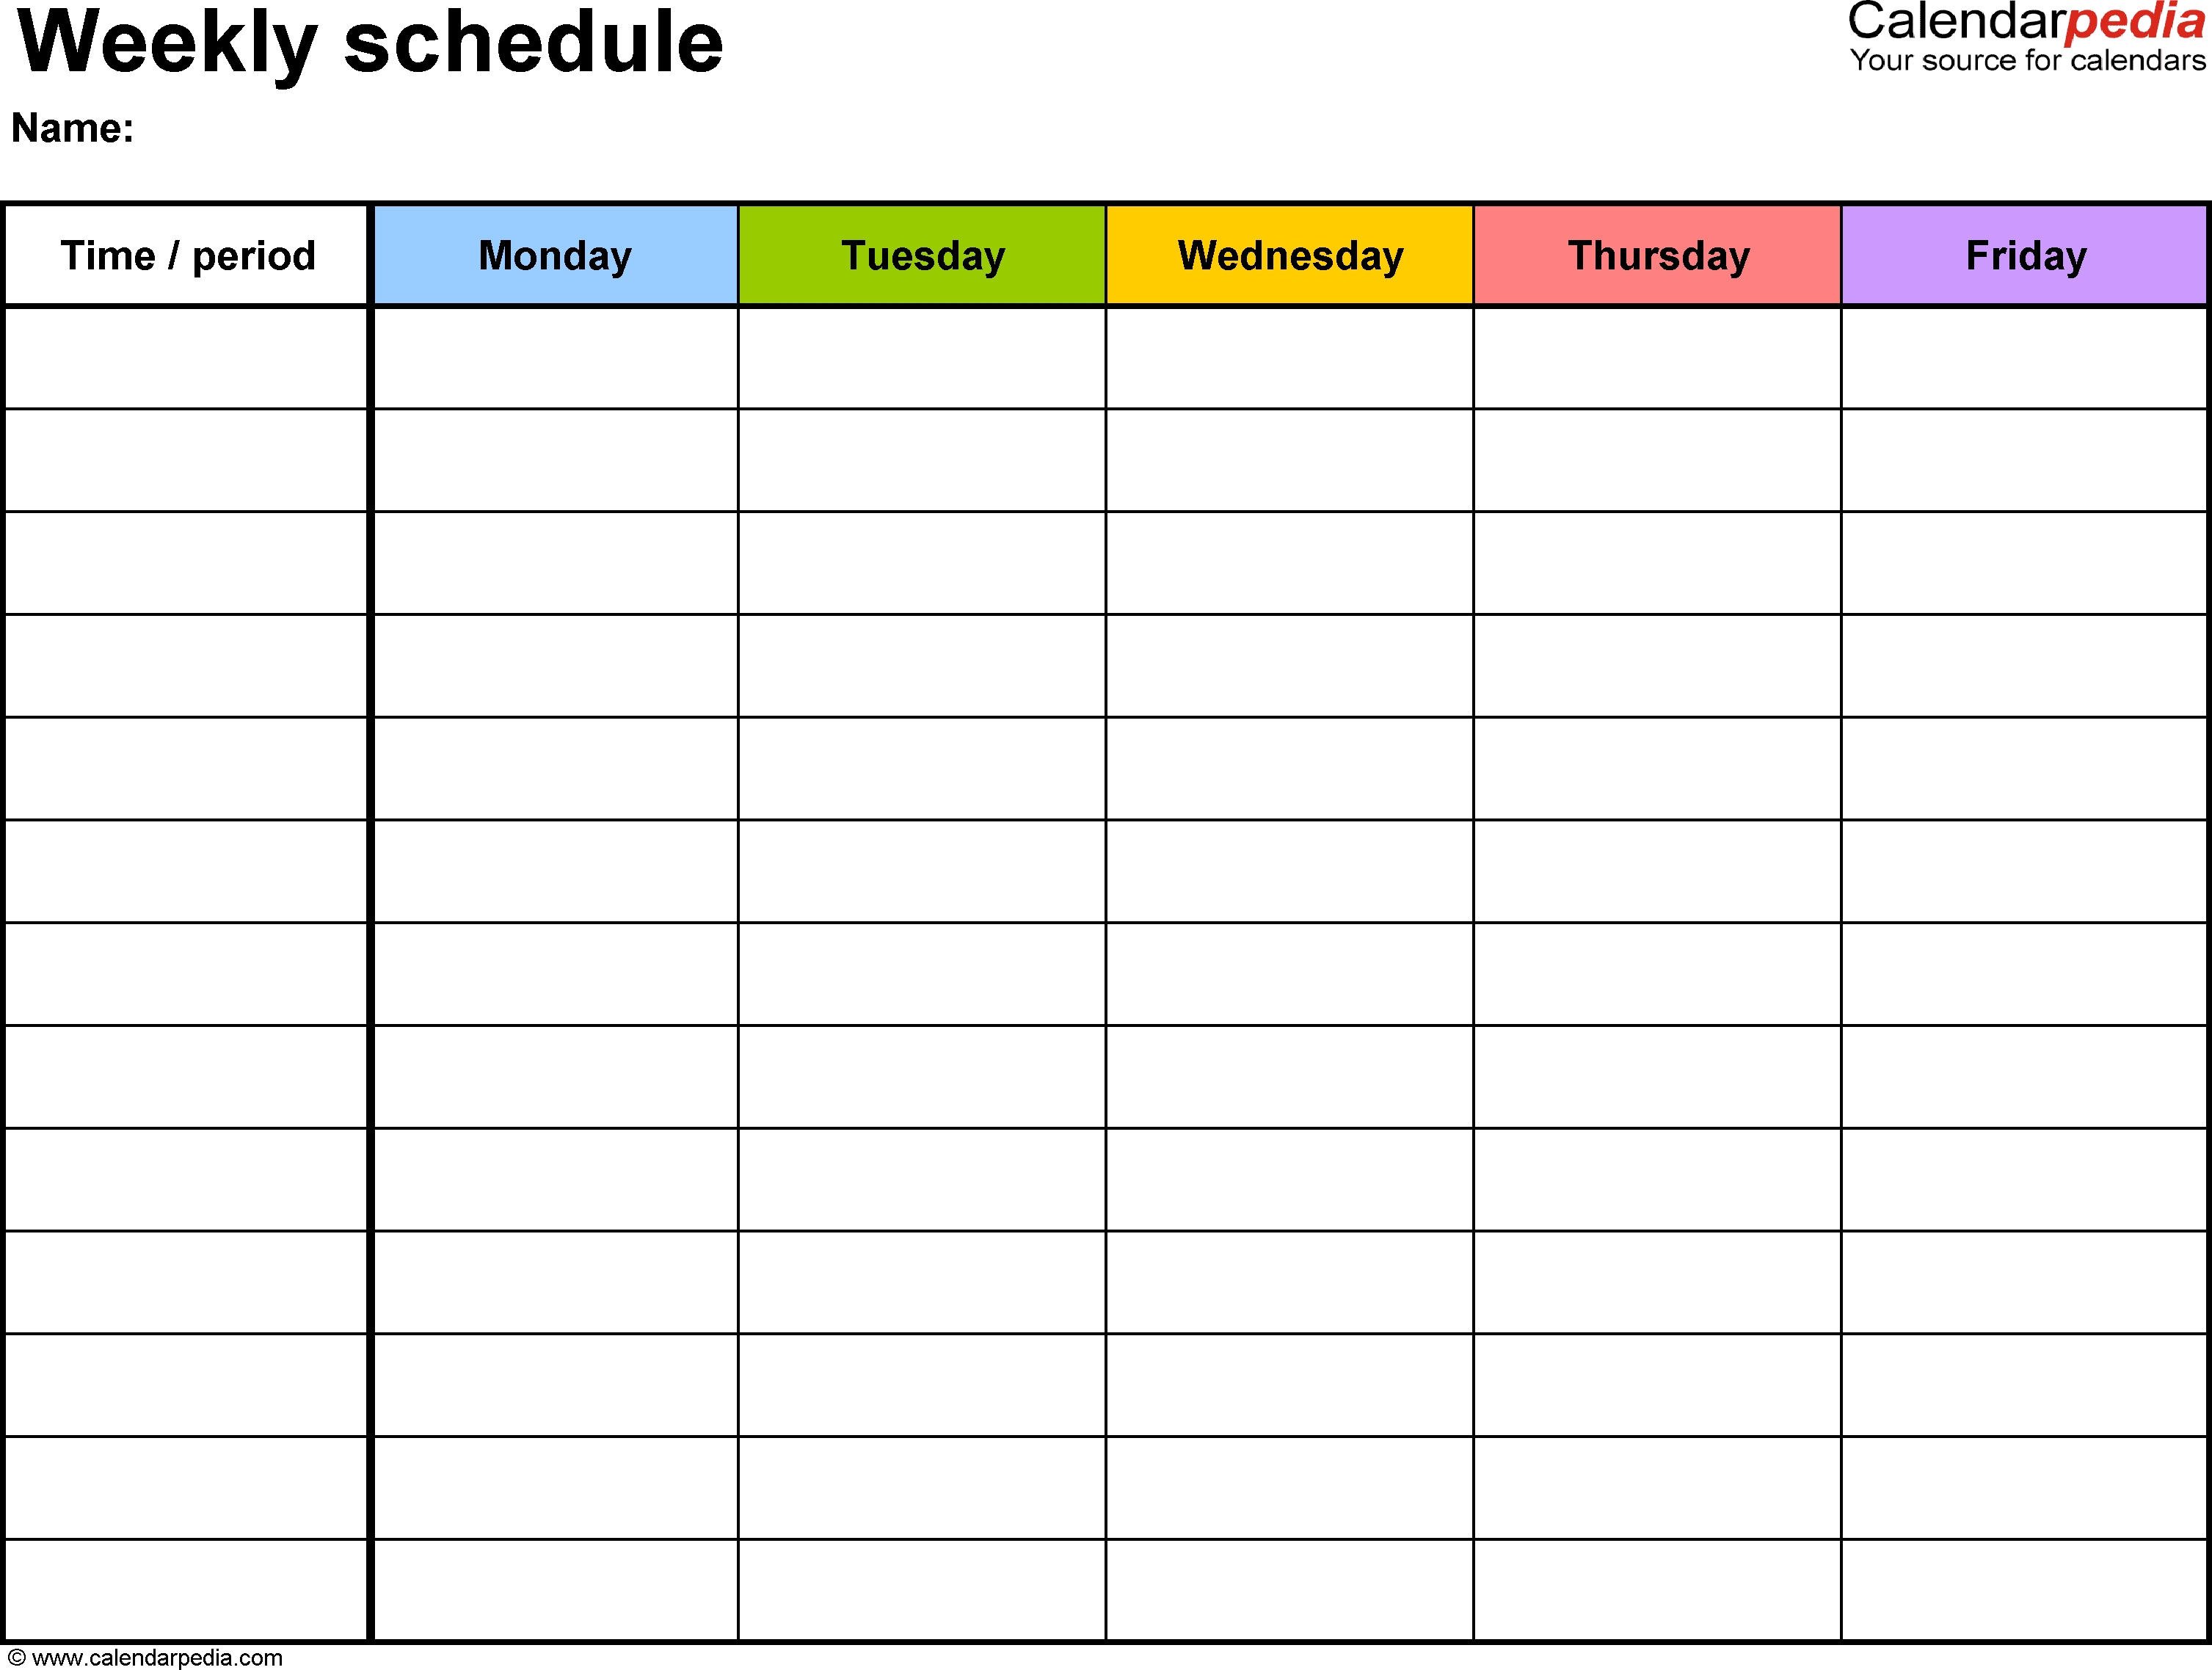 Free Weekly Schedule Templates For Word - 18 Templates with Blank Calendar 5 Day Week